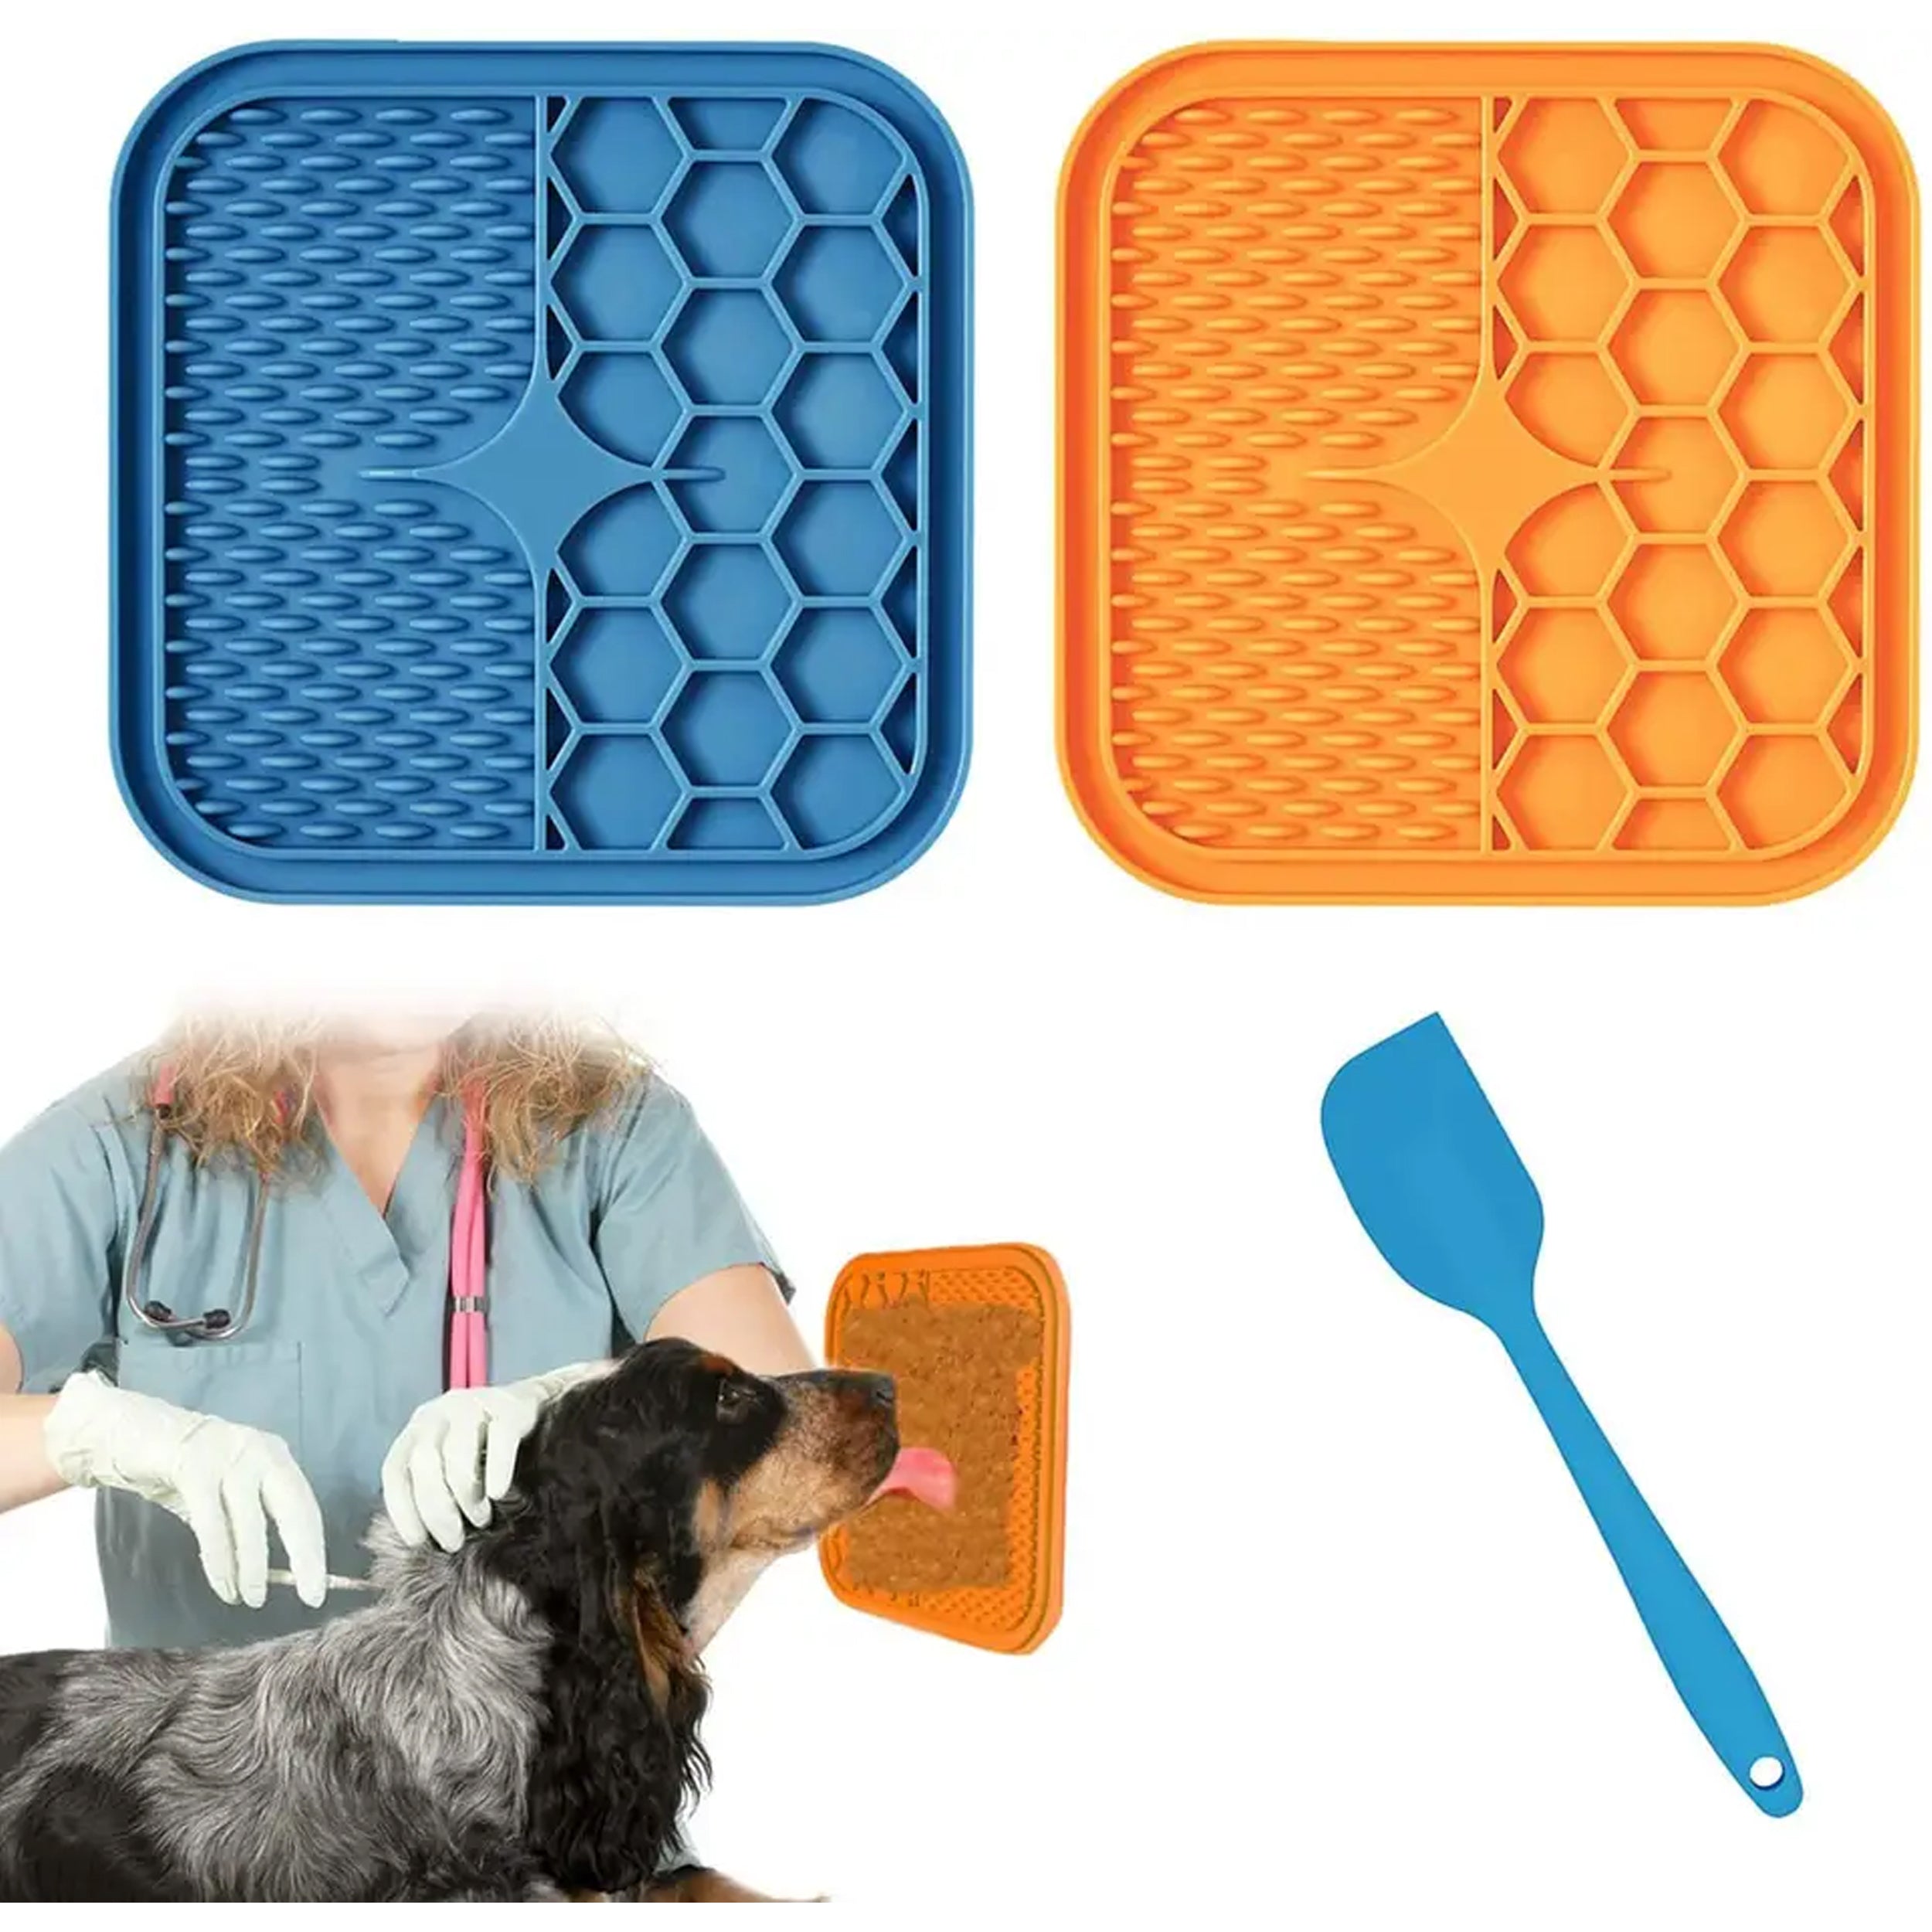 Licking Mat for Dogs & Cats 2 Pack, Diswasher Safe, Slow Feeder Lick Pat  for Puppy Pets Supplies, Anxiety Relief Dog Toys Feeding Mat for Butter